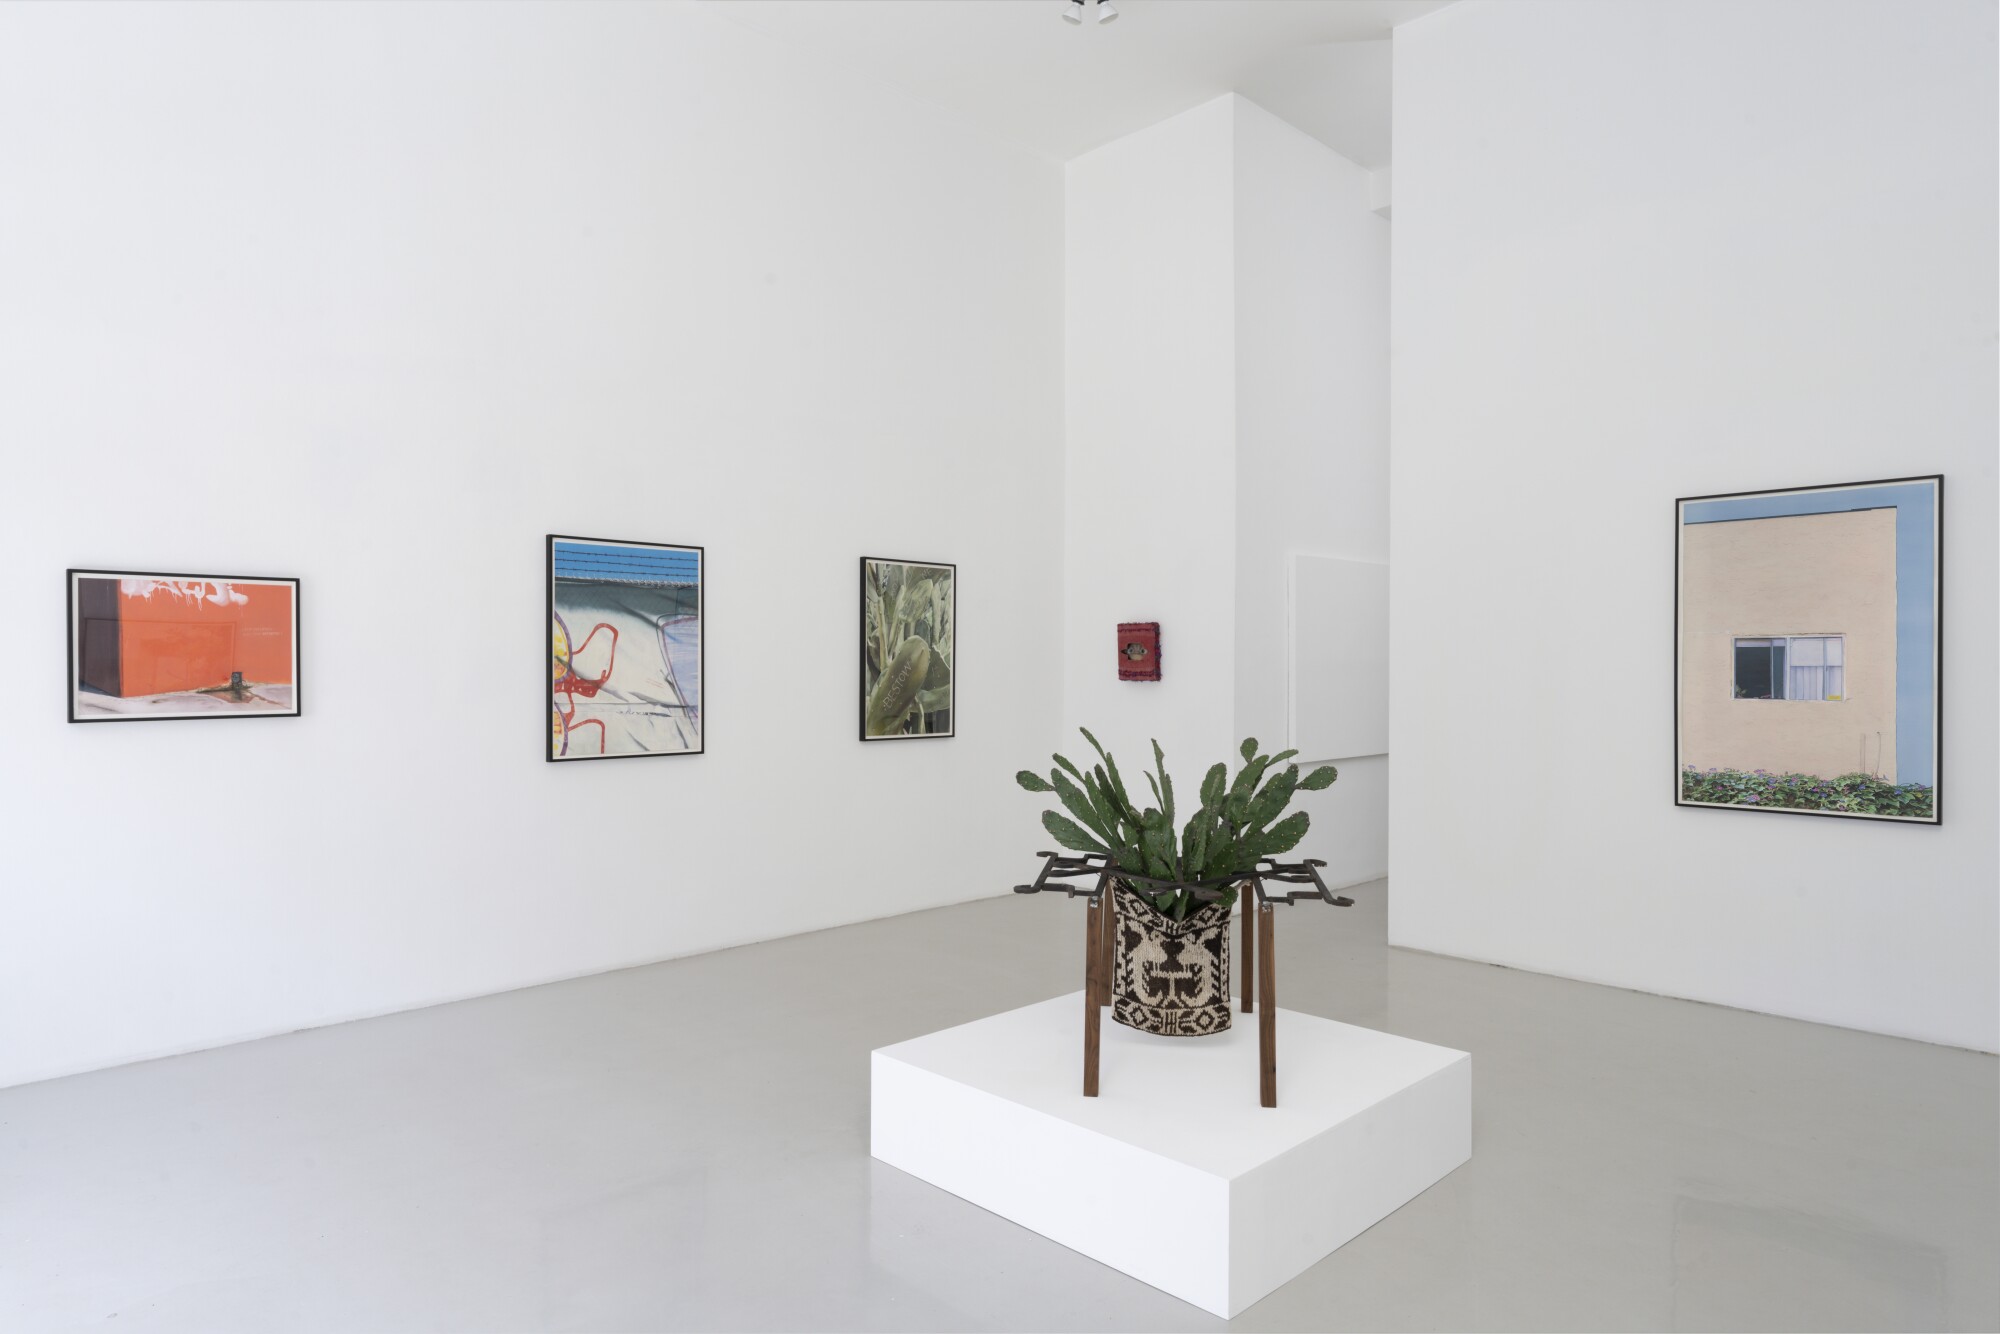 Charlie James Gallery's "In This Place" (Photo credit is Yubo Dong/ ofstudio)